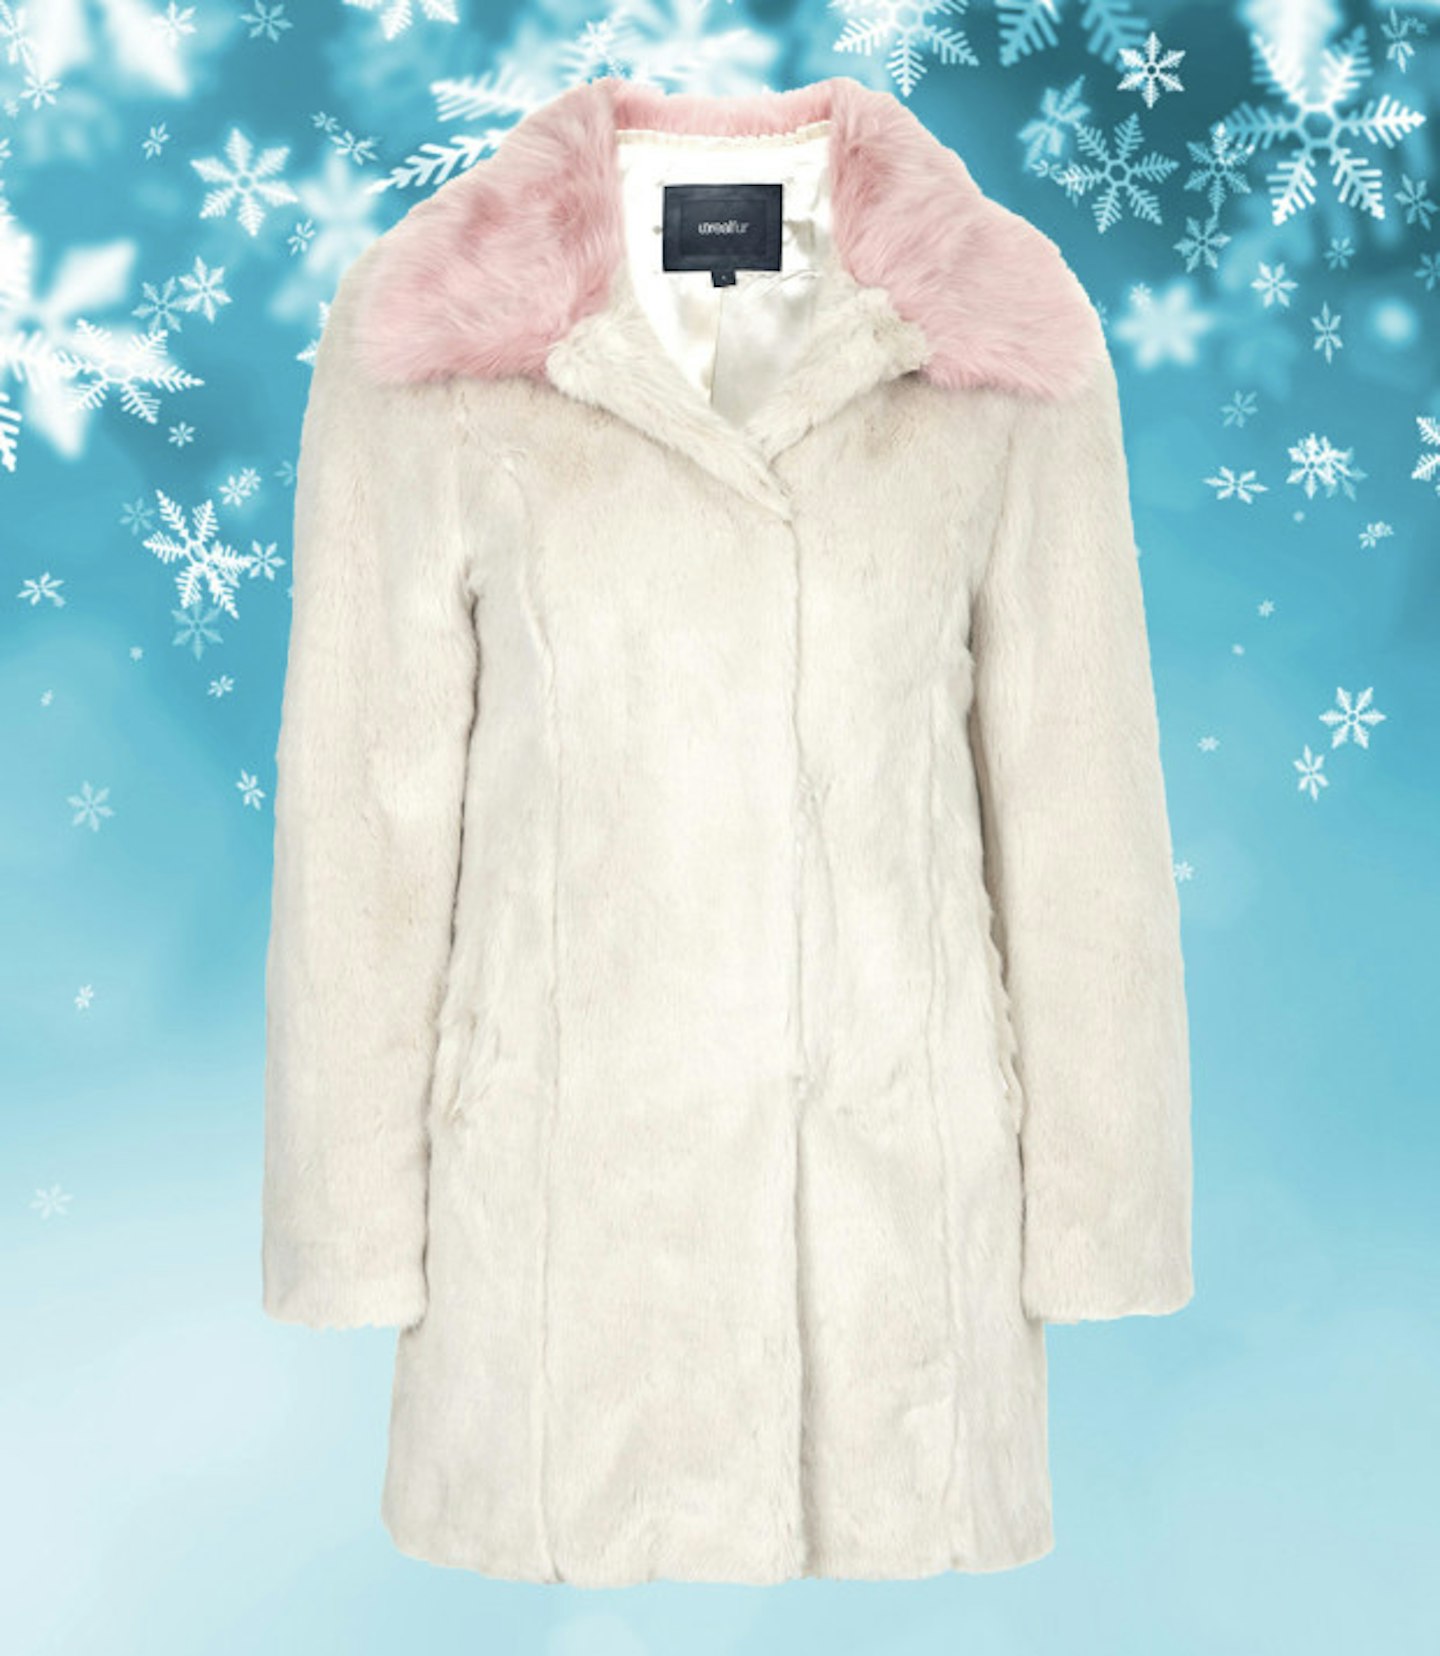 Cream faux fur coat with candy pink collar